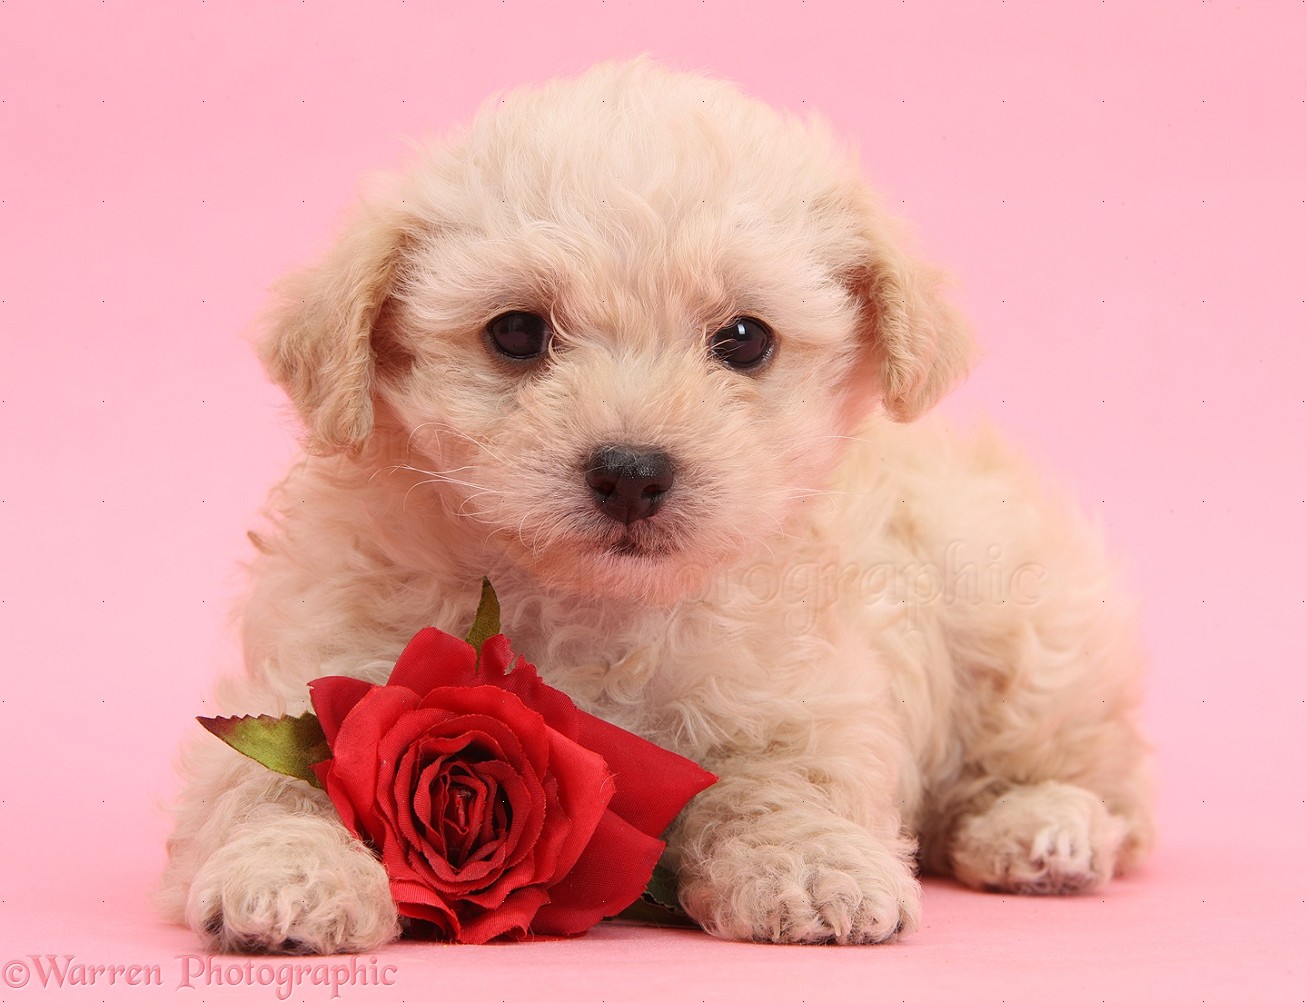 Dog: Cute Valentine puppy with rose on pink background photo WP37872